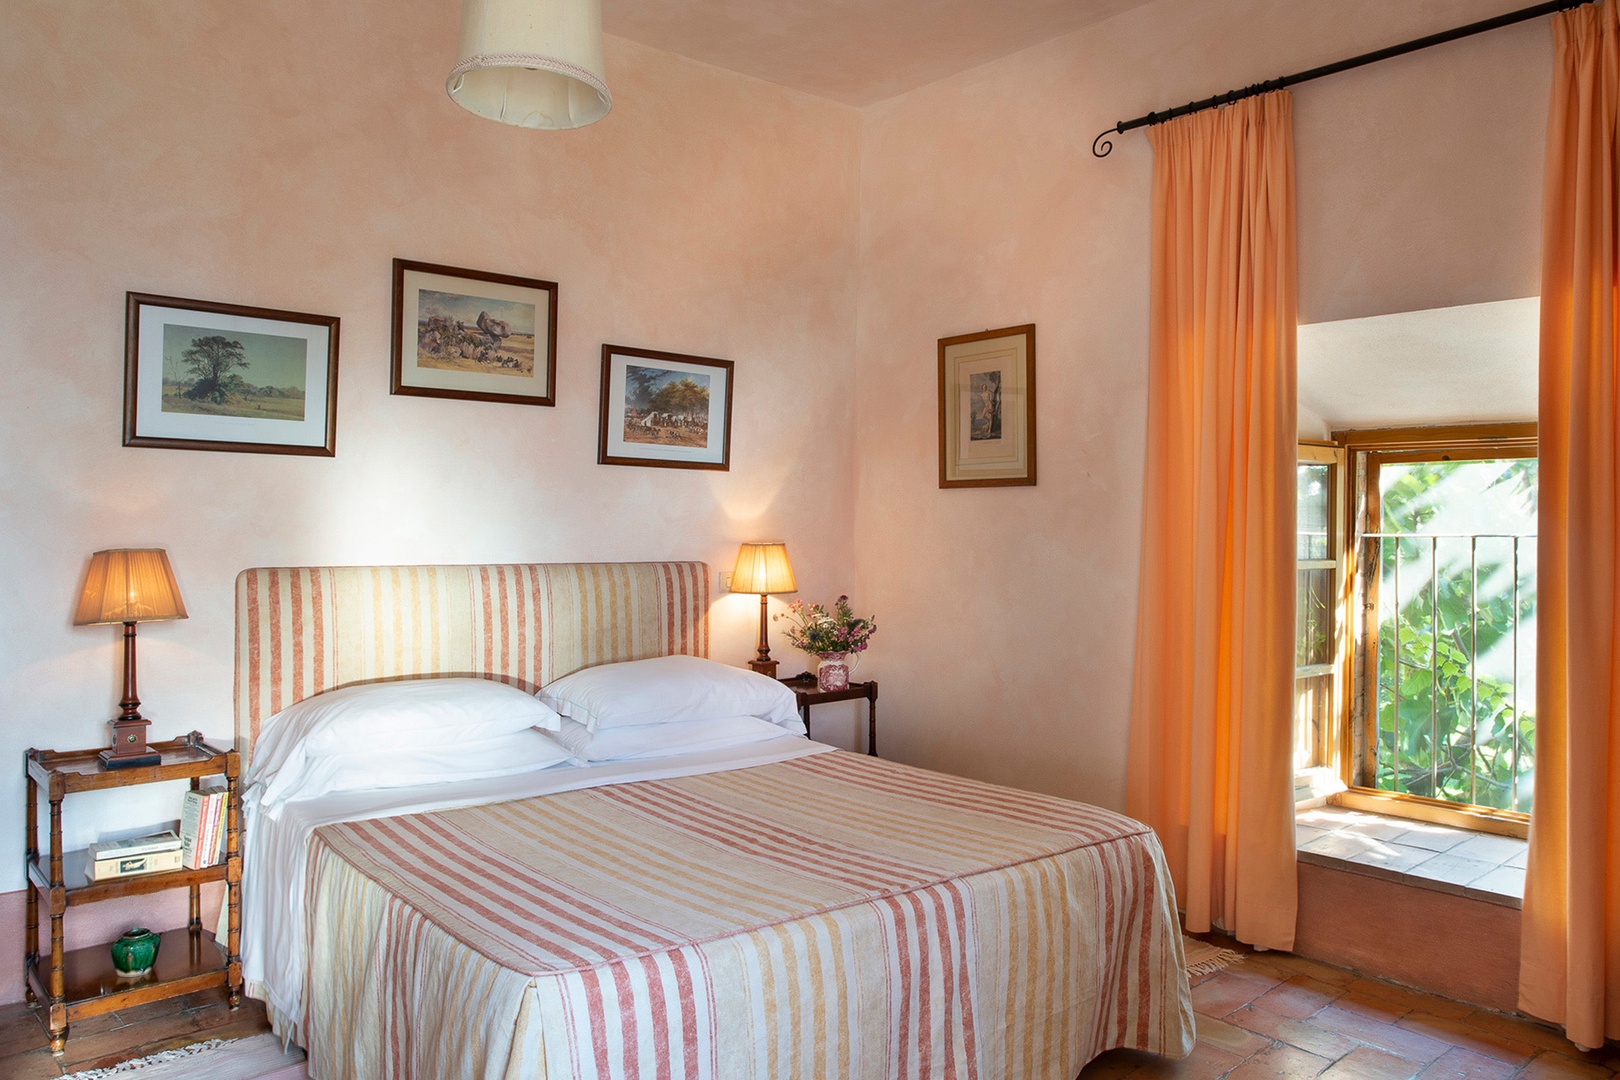 The bedroom has windows overlooking the open lawn on one side and Monte Amiata on the other.